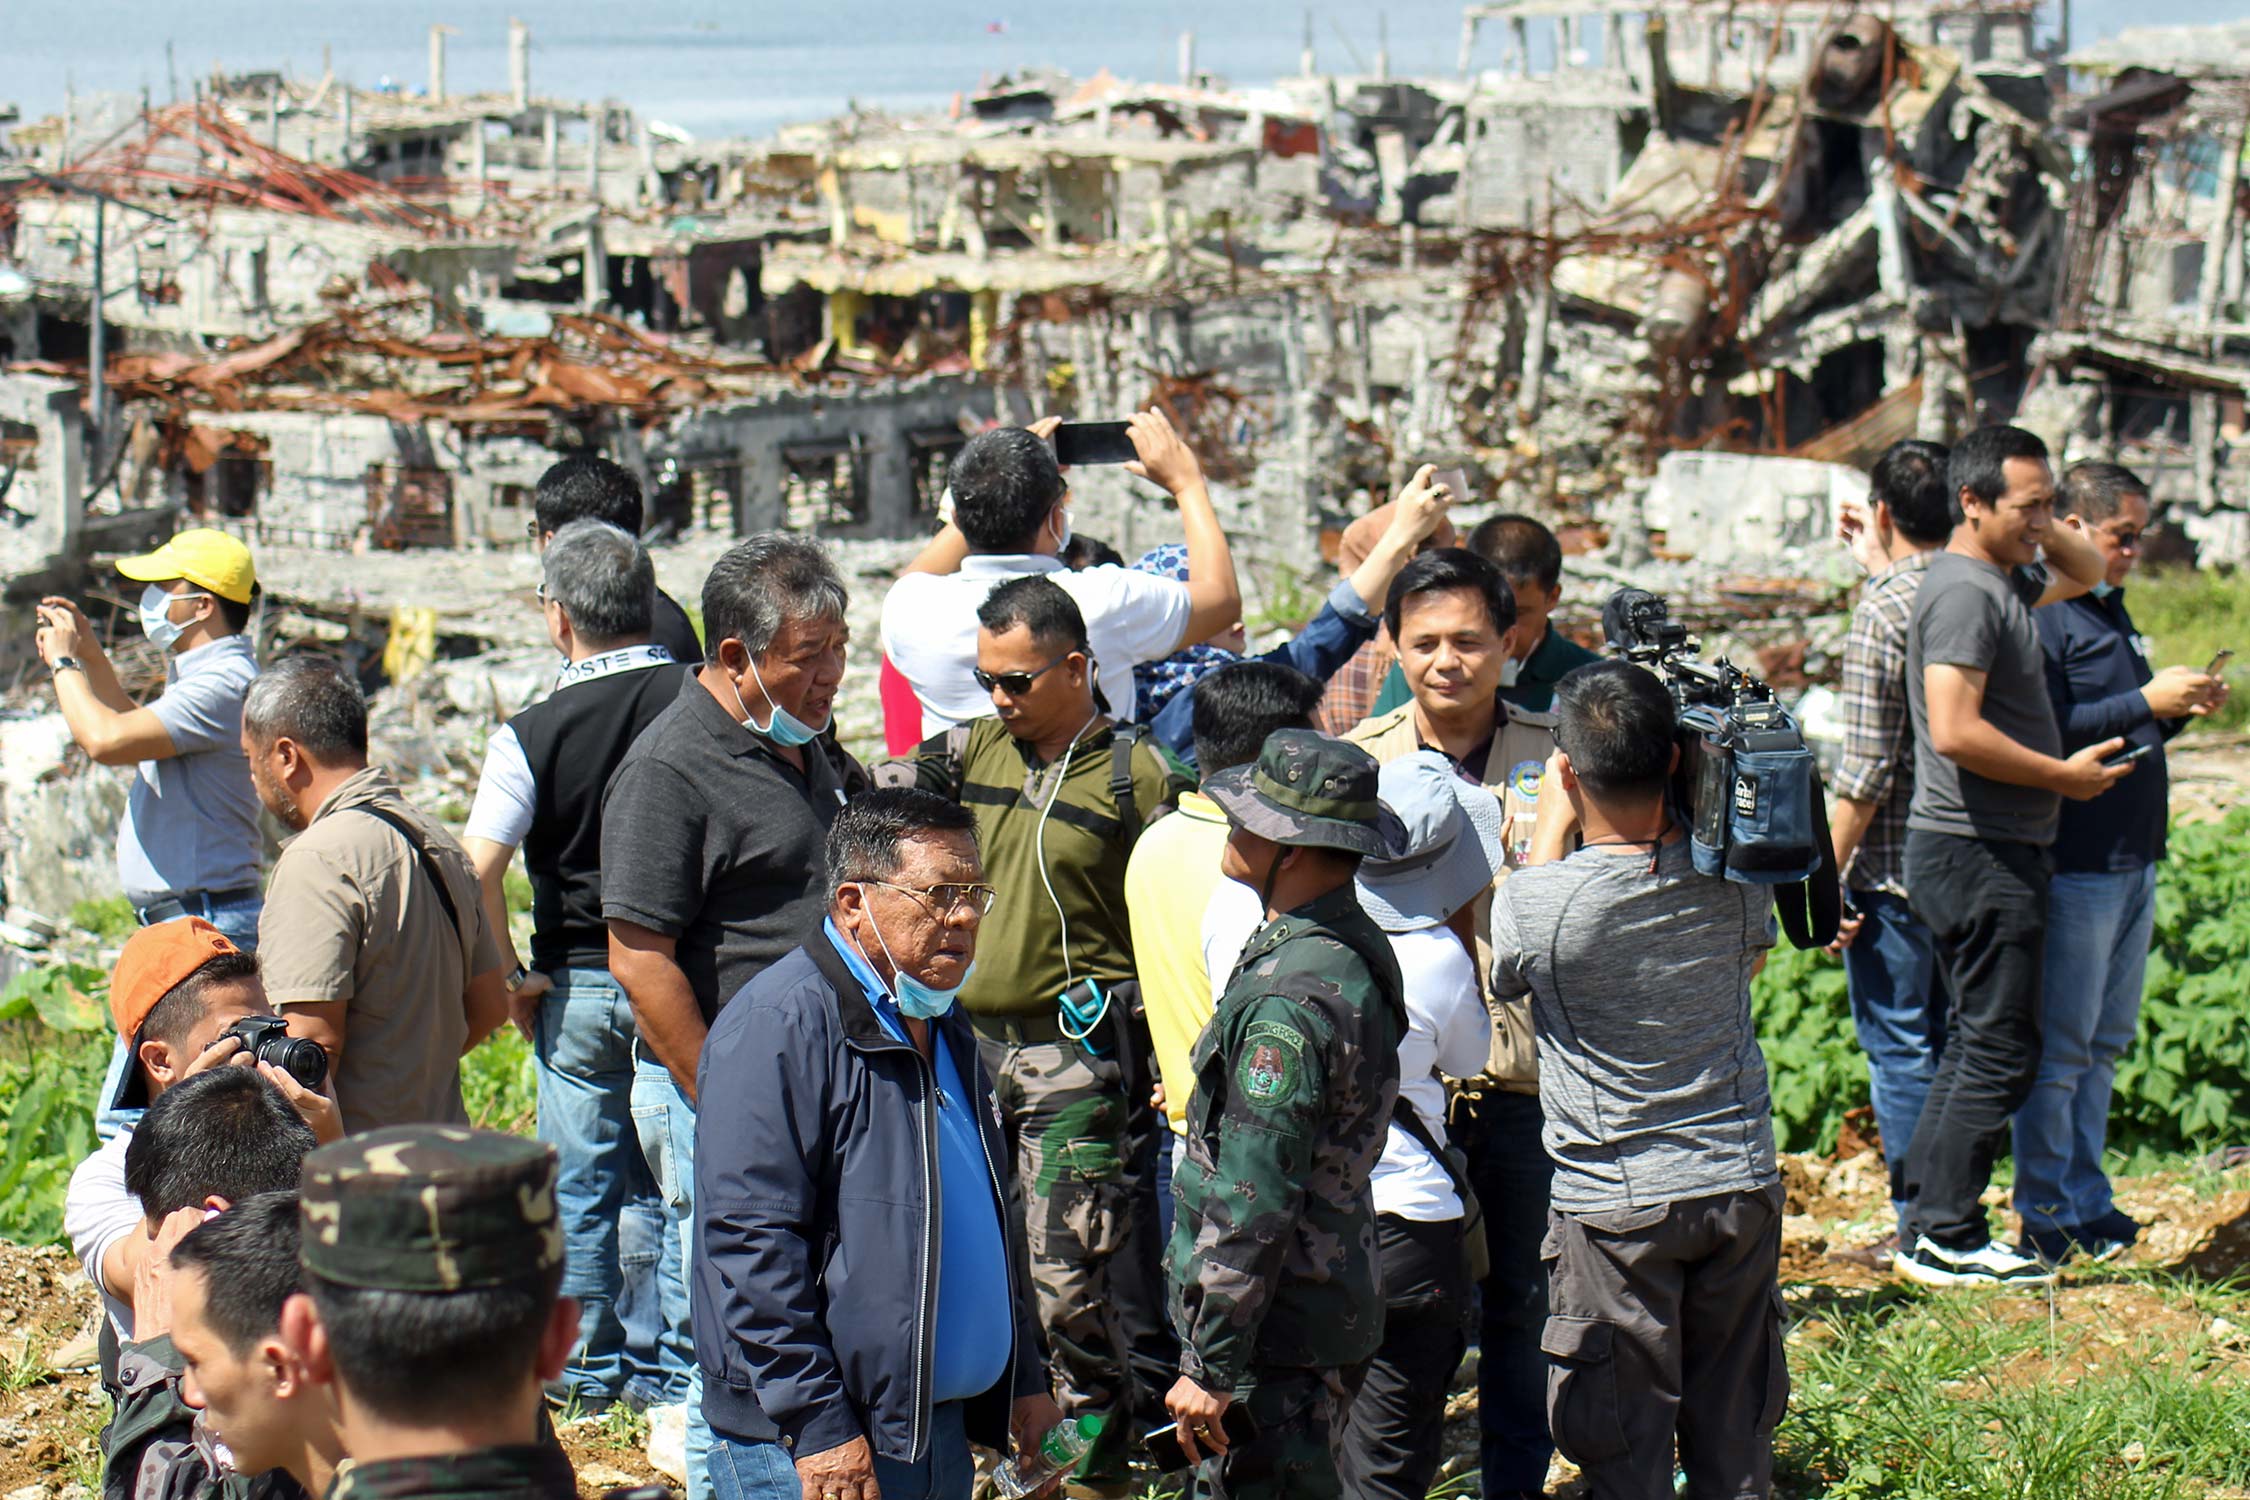 Ground Zero after the Battle of Marawi in the Philippines